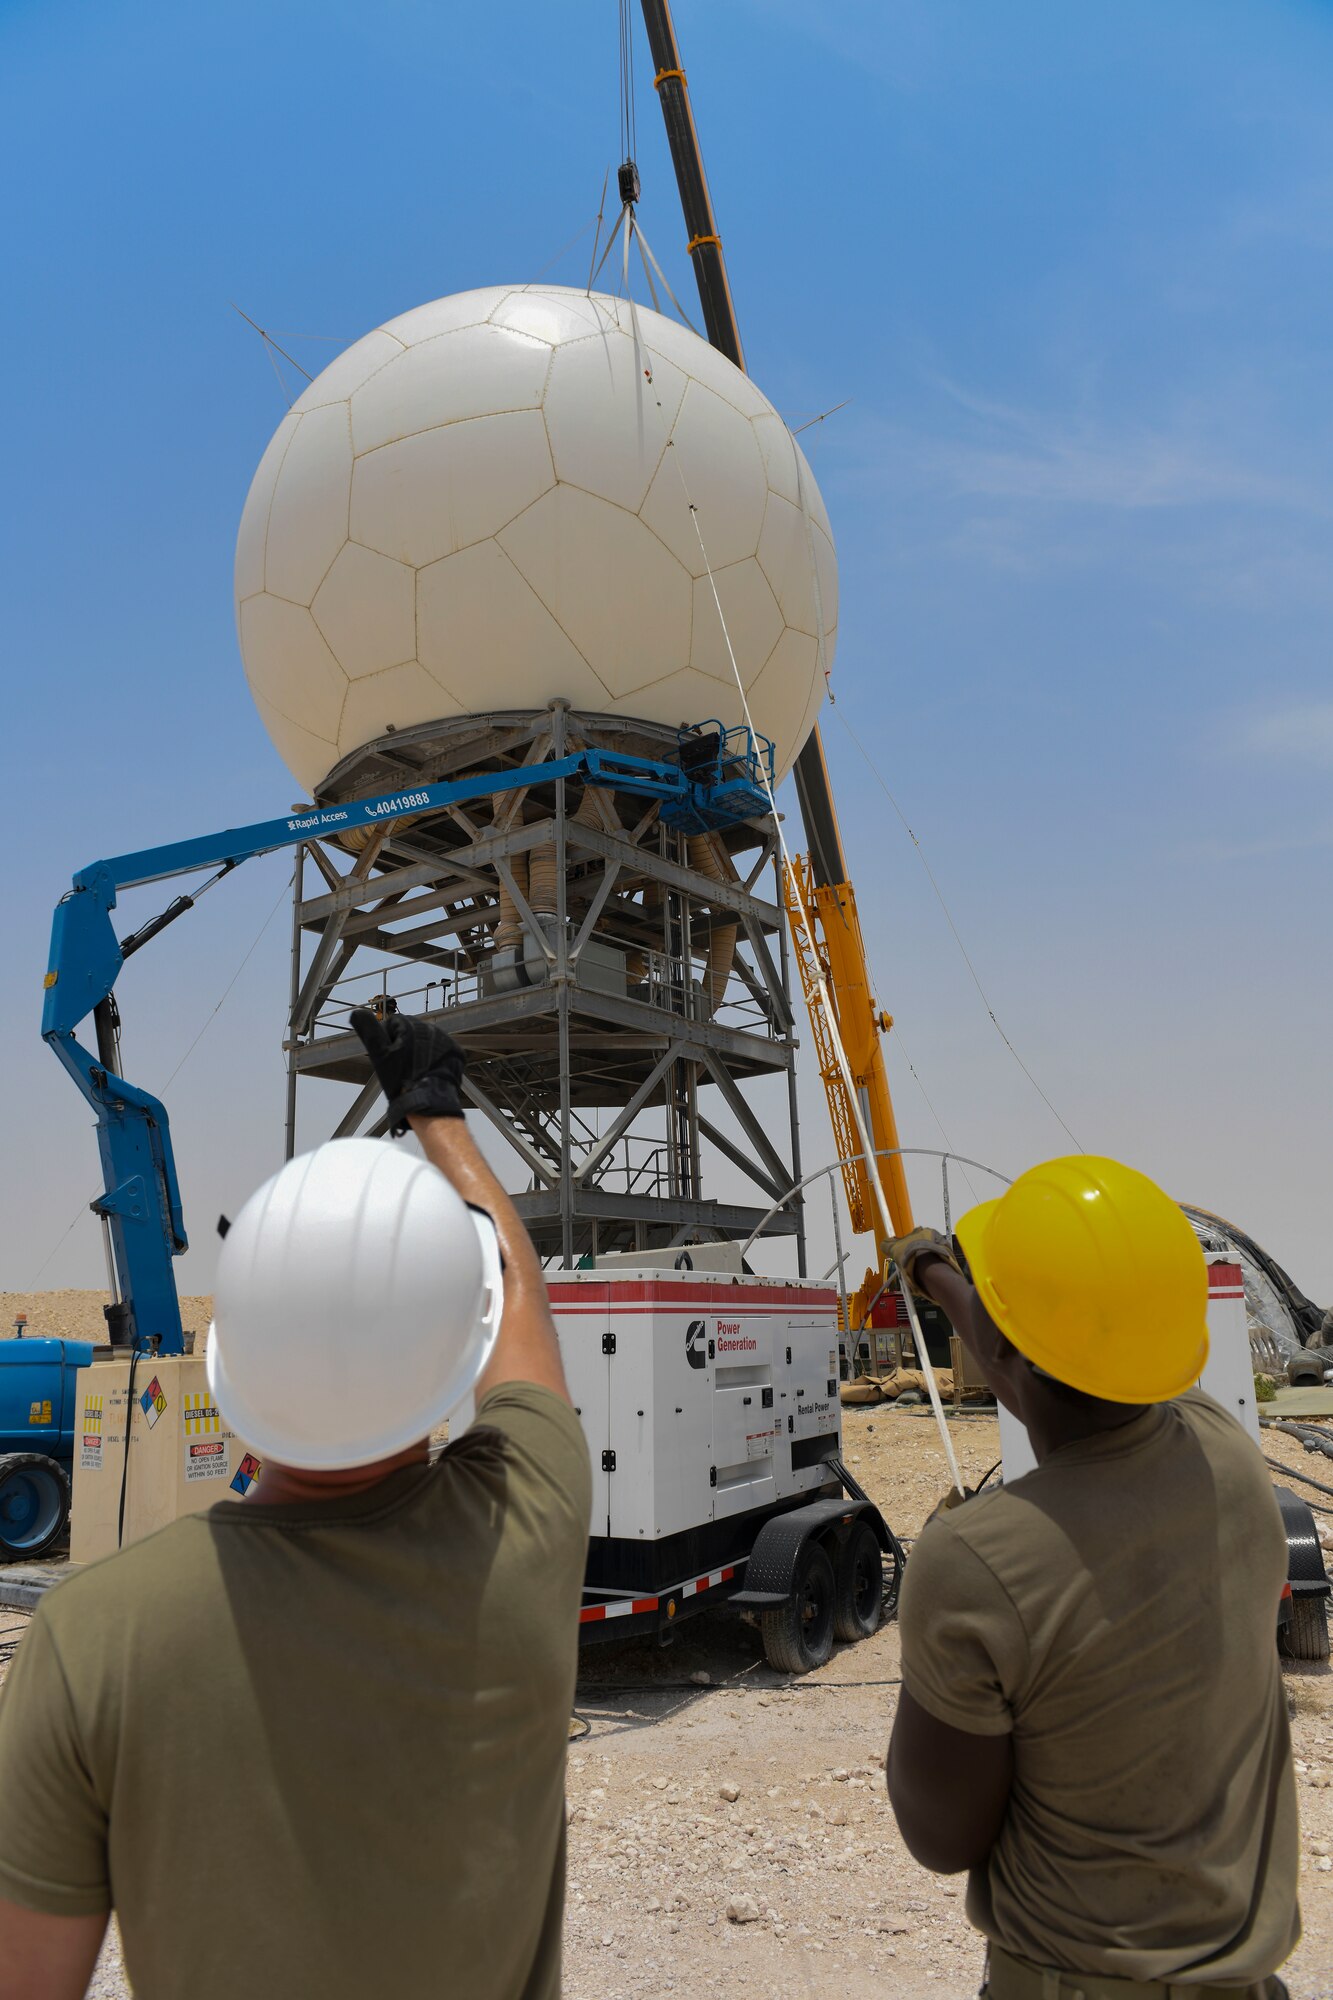 U.S. Air Force Airman 1st Class Alex Wolfe and Airman 1st Class Tahj Ballard, 727th Expeditionary Air Control Squadron, Detachment 3 radar technician and power production technician, respectively, help secure a radome as it’s lowered into place as part of regular maintenance July 27, 2021, at Al Udeid Air Base, Qatar. The 727th EACS radar technicians perform several hours of maintenance and calibration daily to ensure radar systems perform at optimal levels. (U.S. Air Force by Staff Sgt. Alexandria Lee)